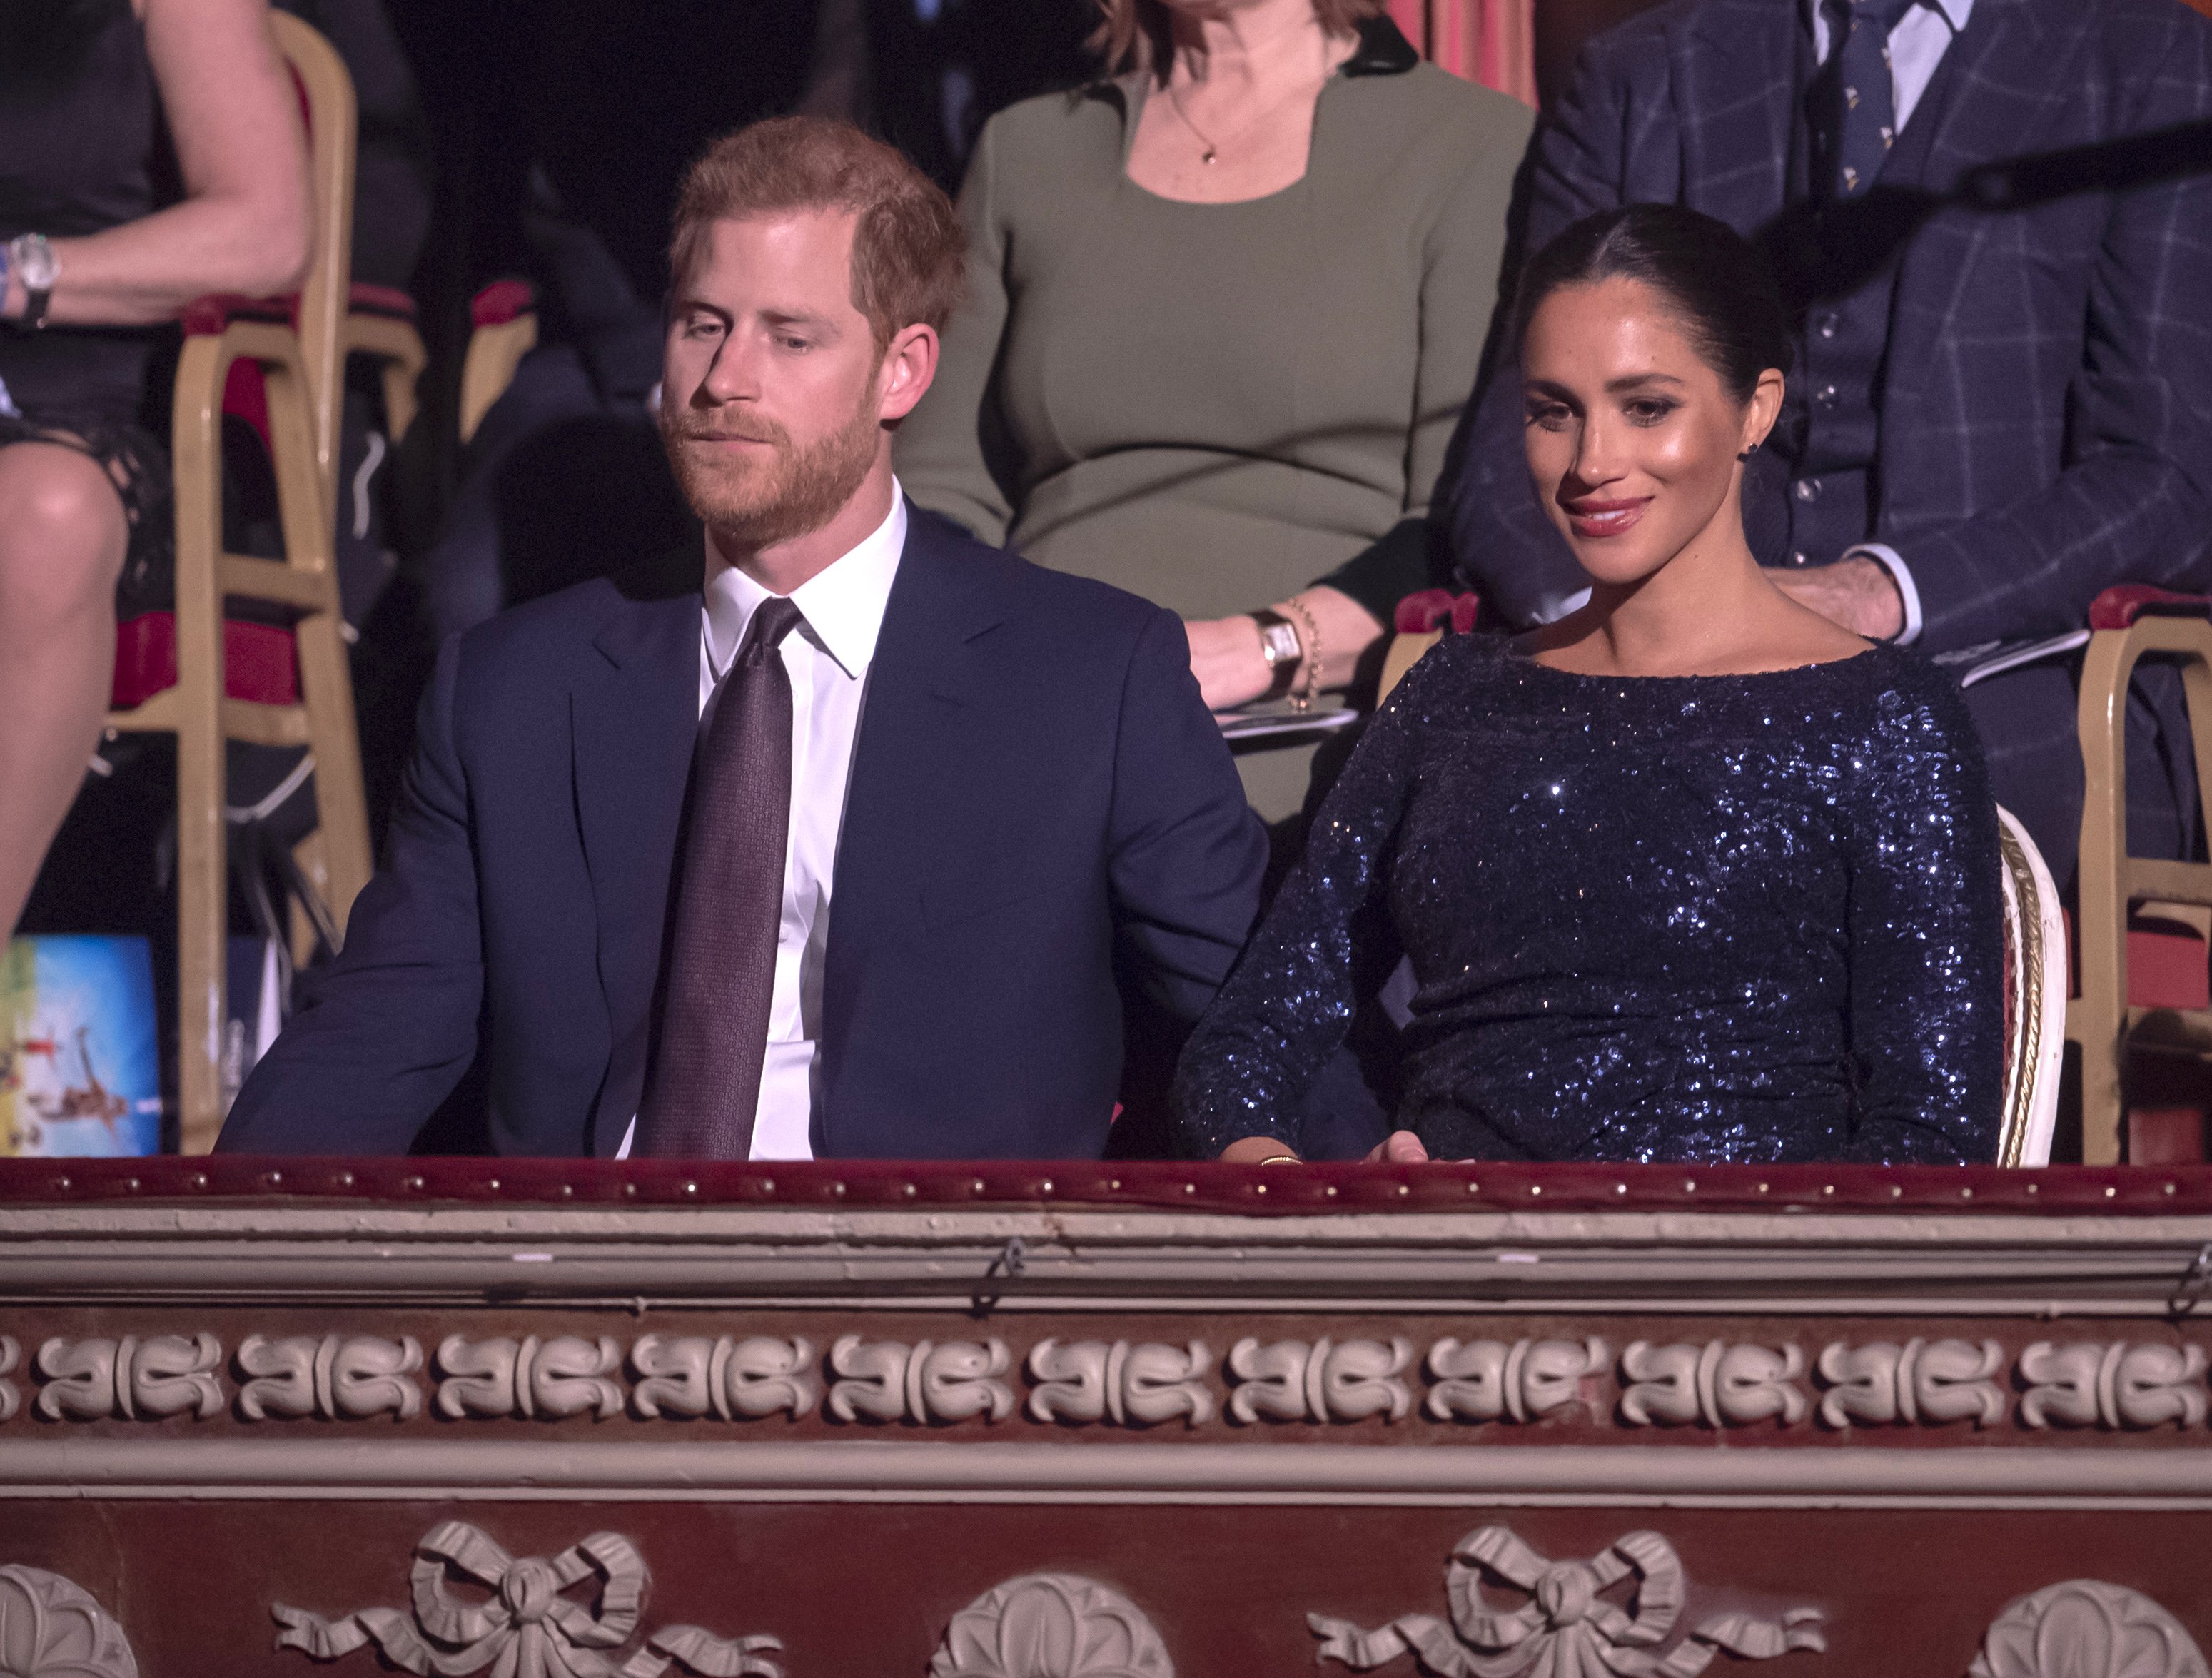 Prince Harry and Meghan Markle attend the Cirque du Soleil Premiere Of "TOTEM" at Royal Albert Hall on January 16, 2019 in London, England | Photo: Getty Images